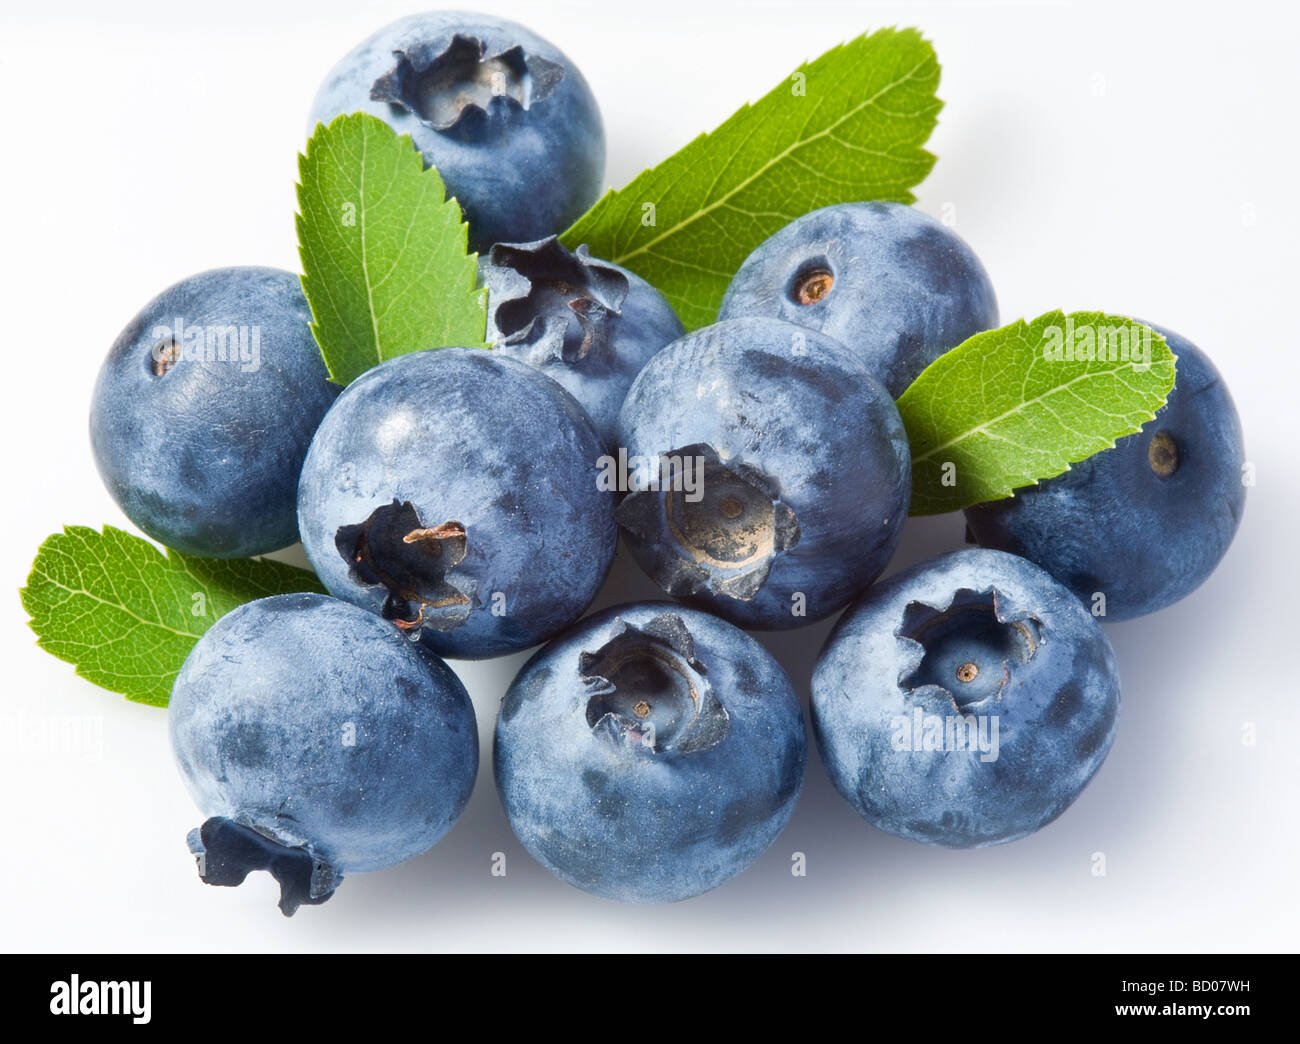 Bilberry on a white background Stock Photo